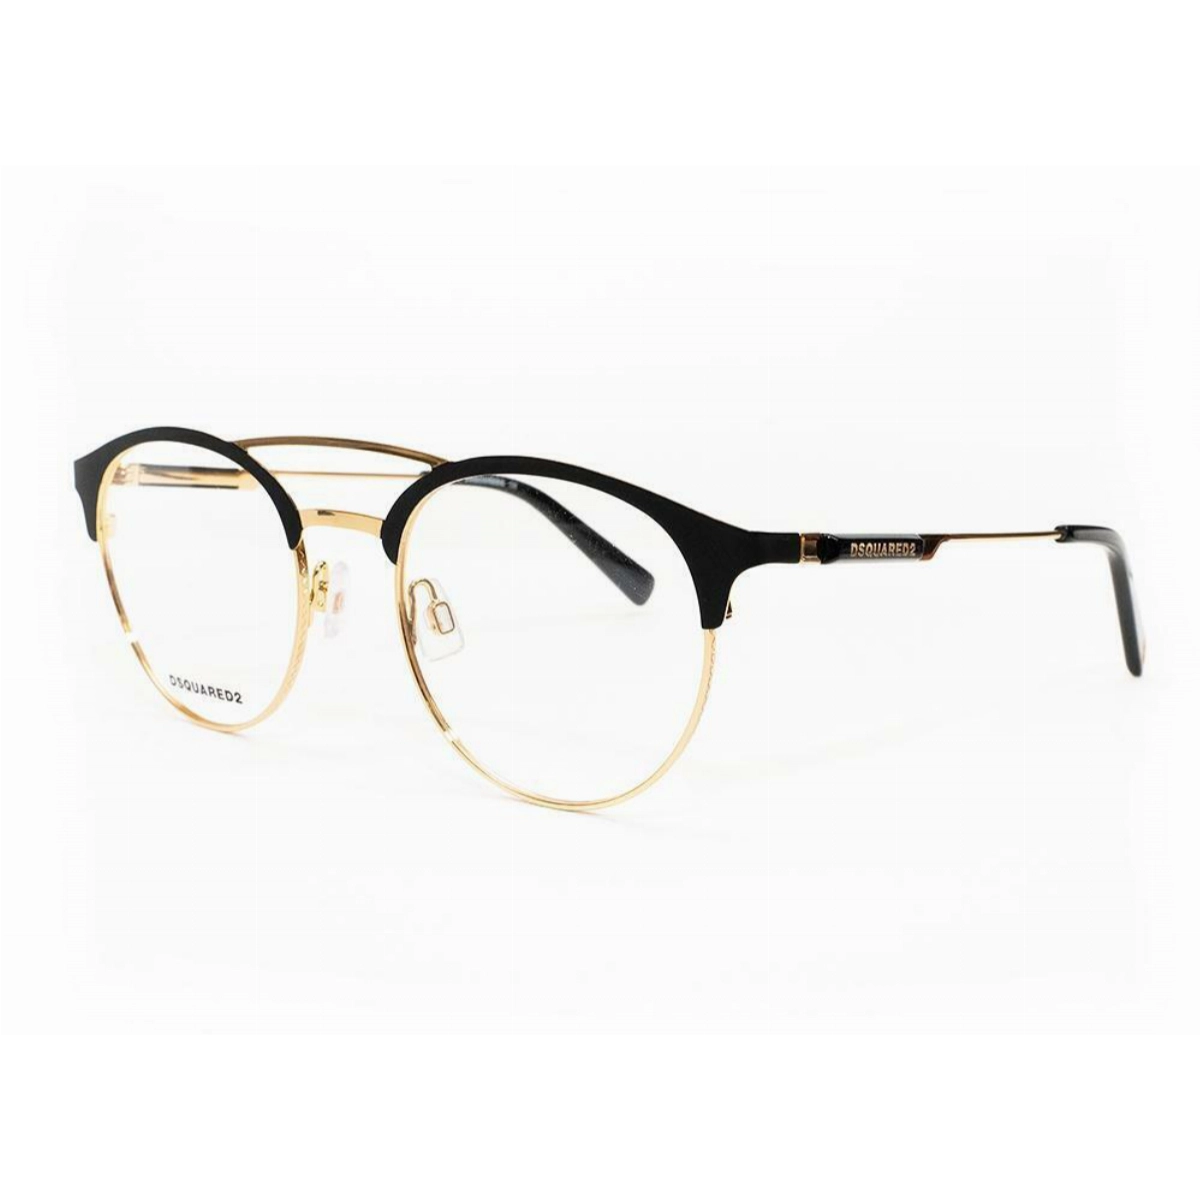 GAFAS DE MUJER DSQUARED2 DQ5284-030-51